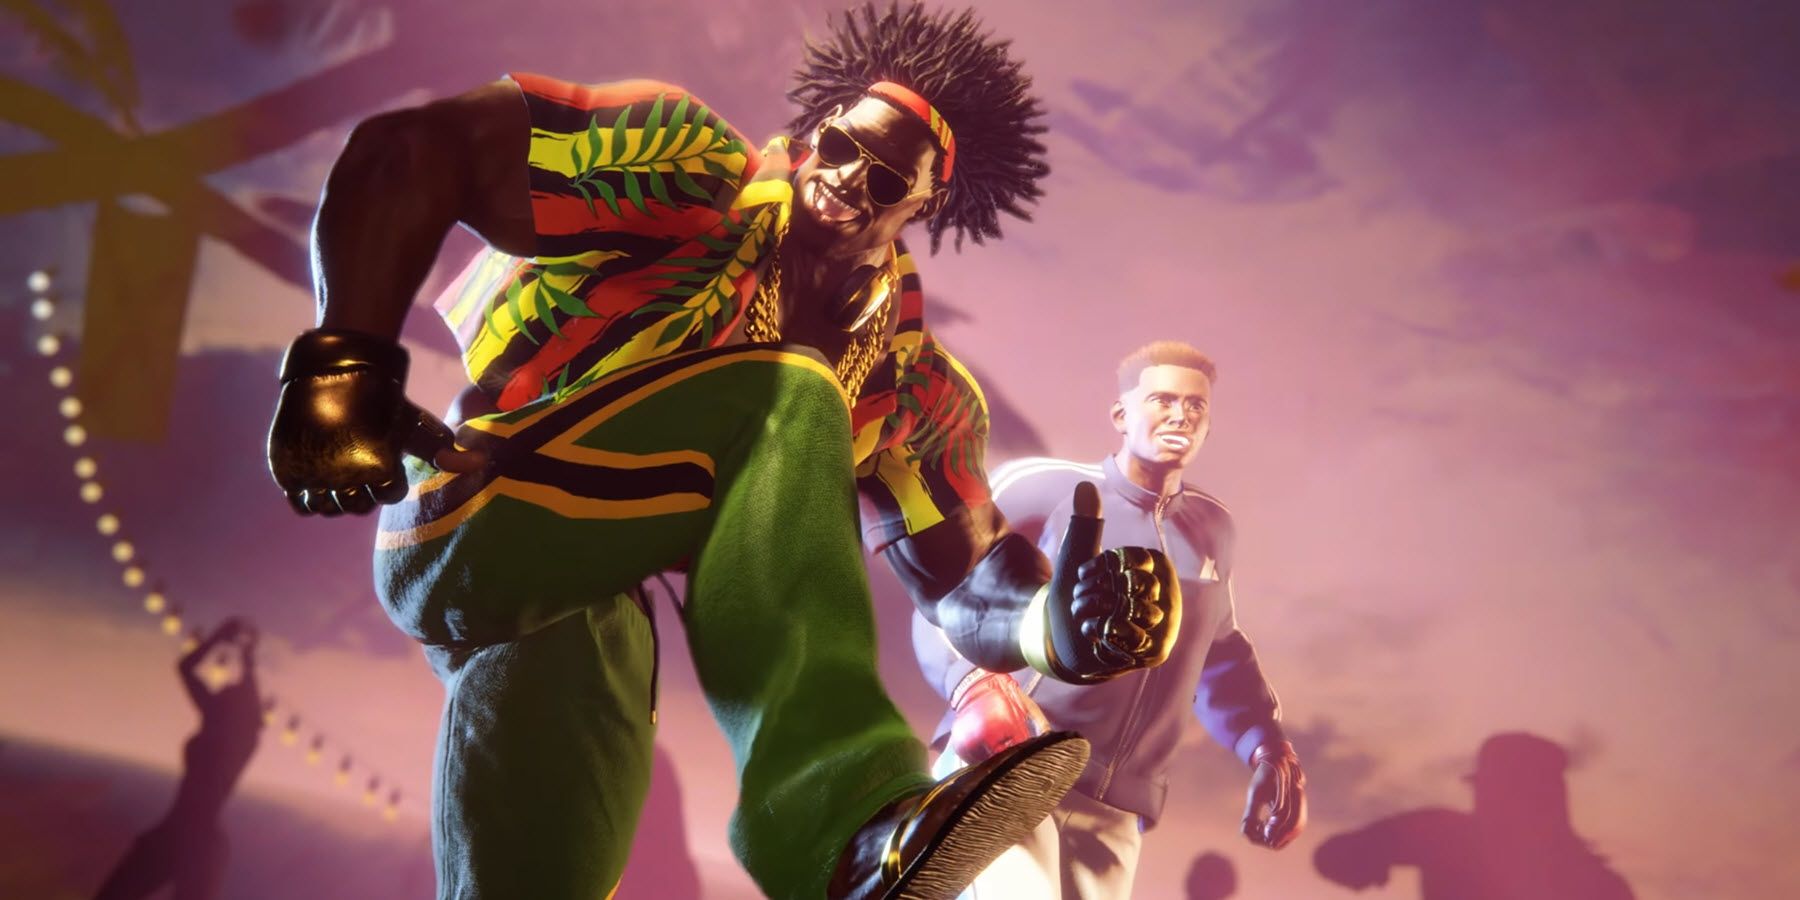 Street Fighter 6: Release Date, Leaks, Characters, Trailers, and